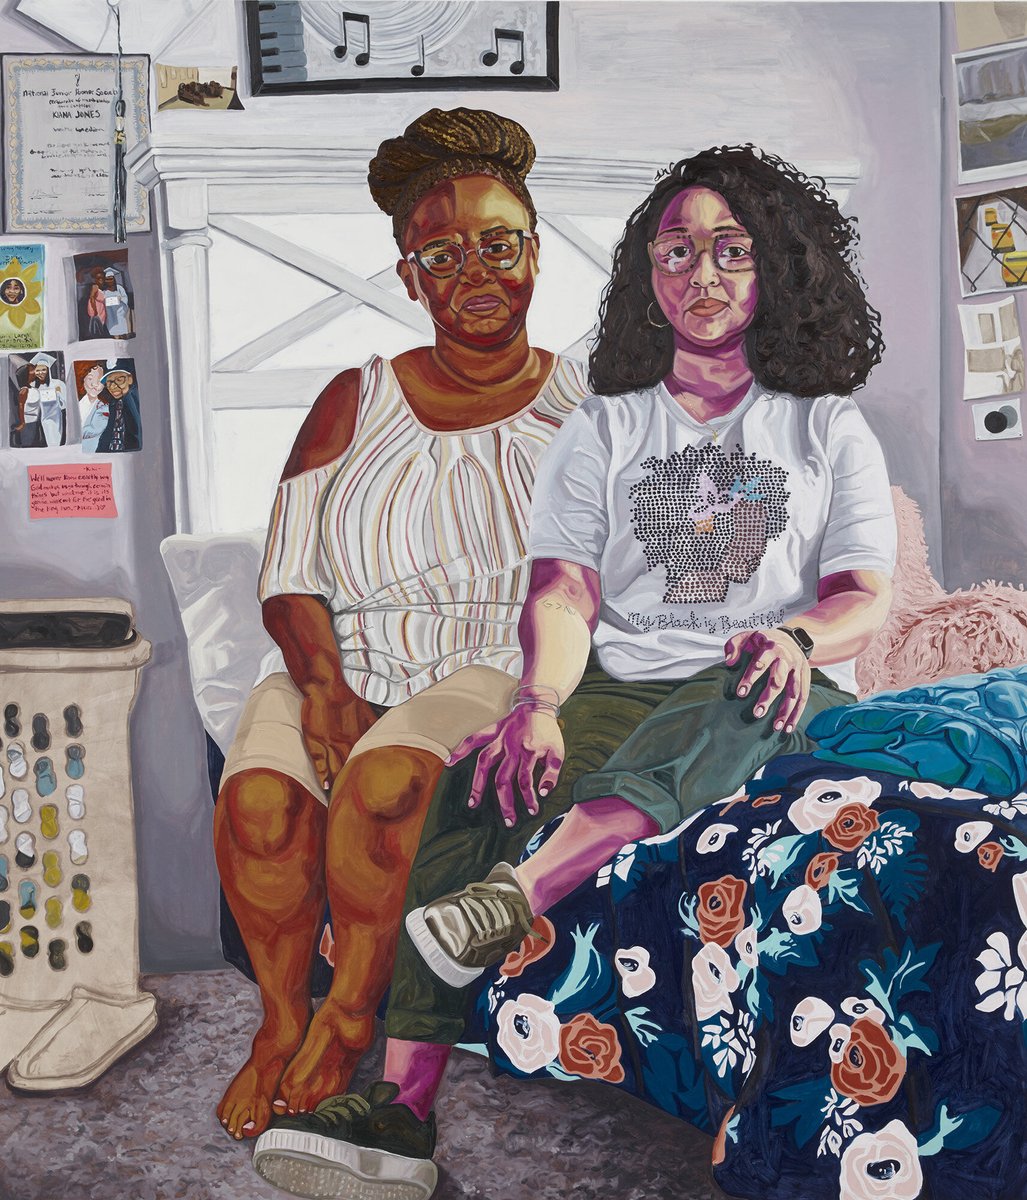 Portraits by American painter Jordan Casteel, 2010s, known for her large-scale oils depicting people from the communities in which she's lived and worked, including New Haven, Harlem, and Newark